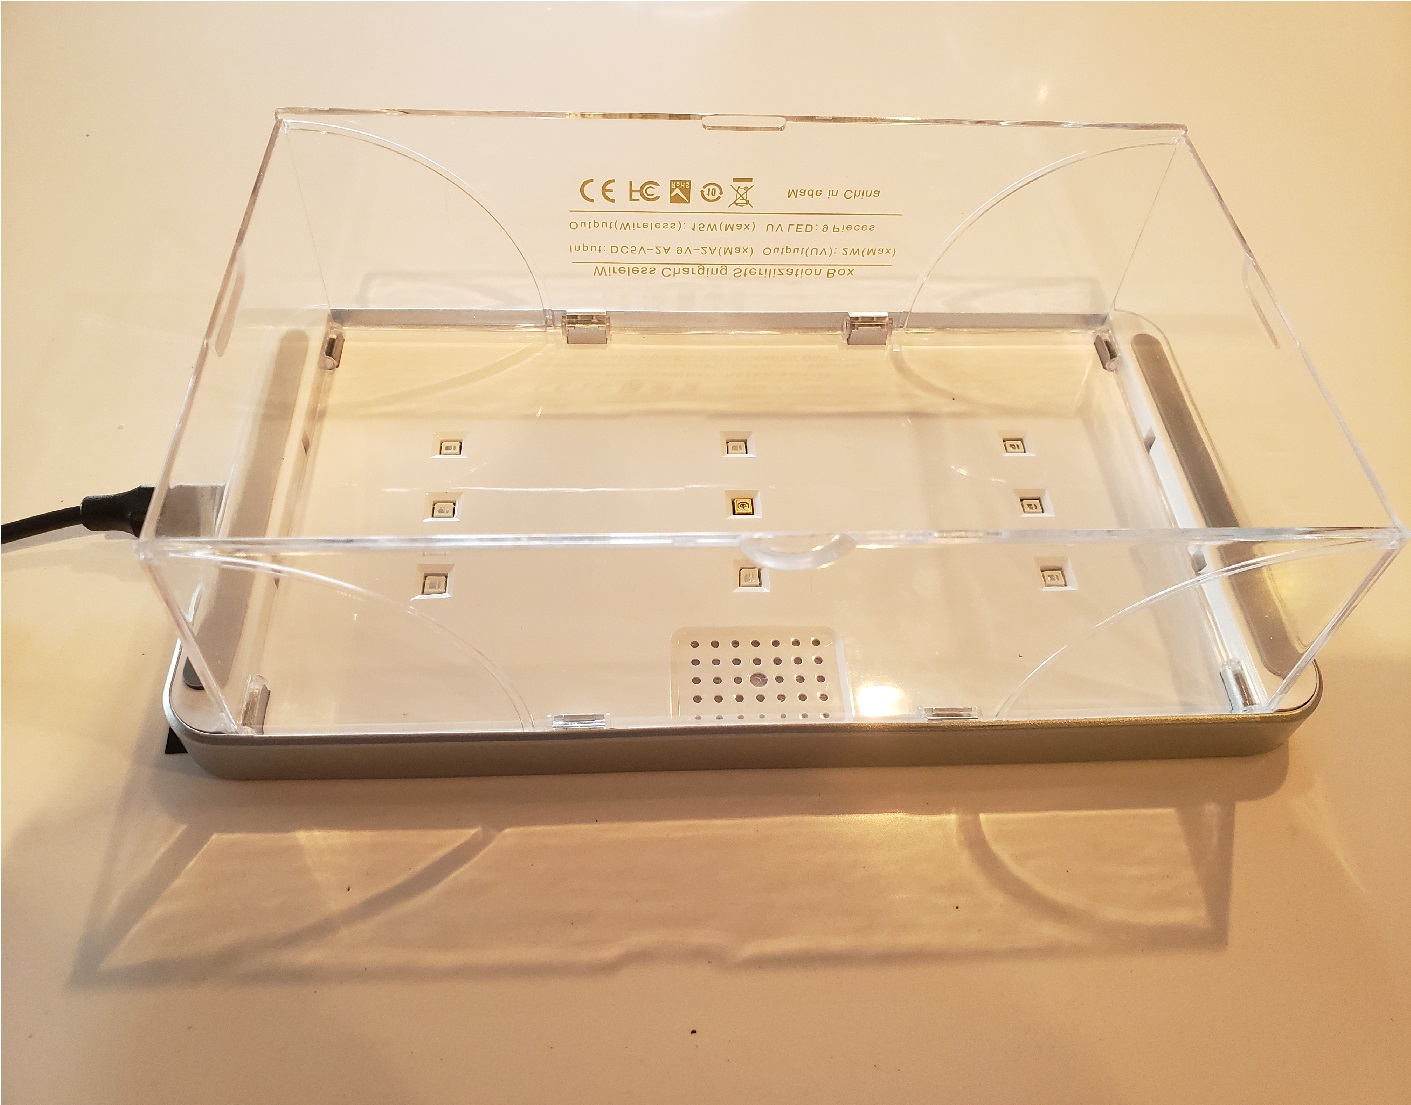 image of the underside of the UV sterilizer box with the box sides expanded